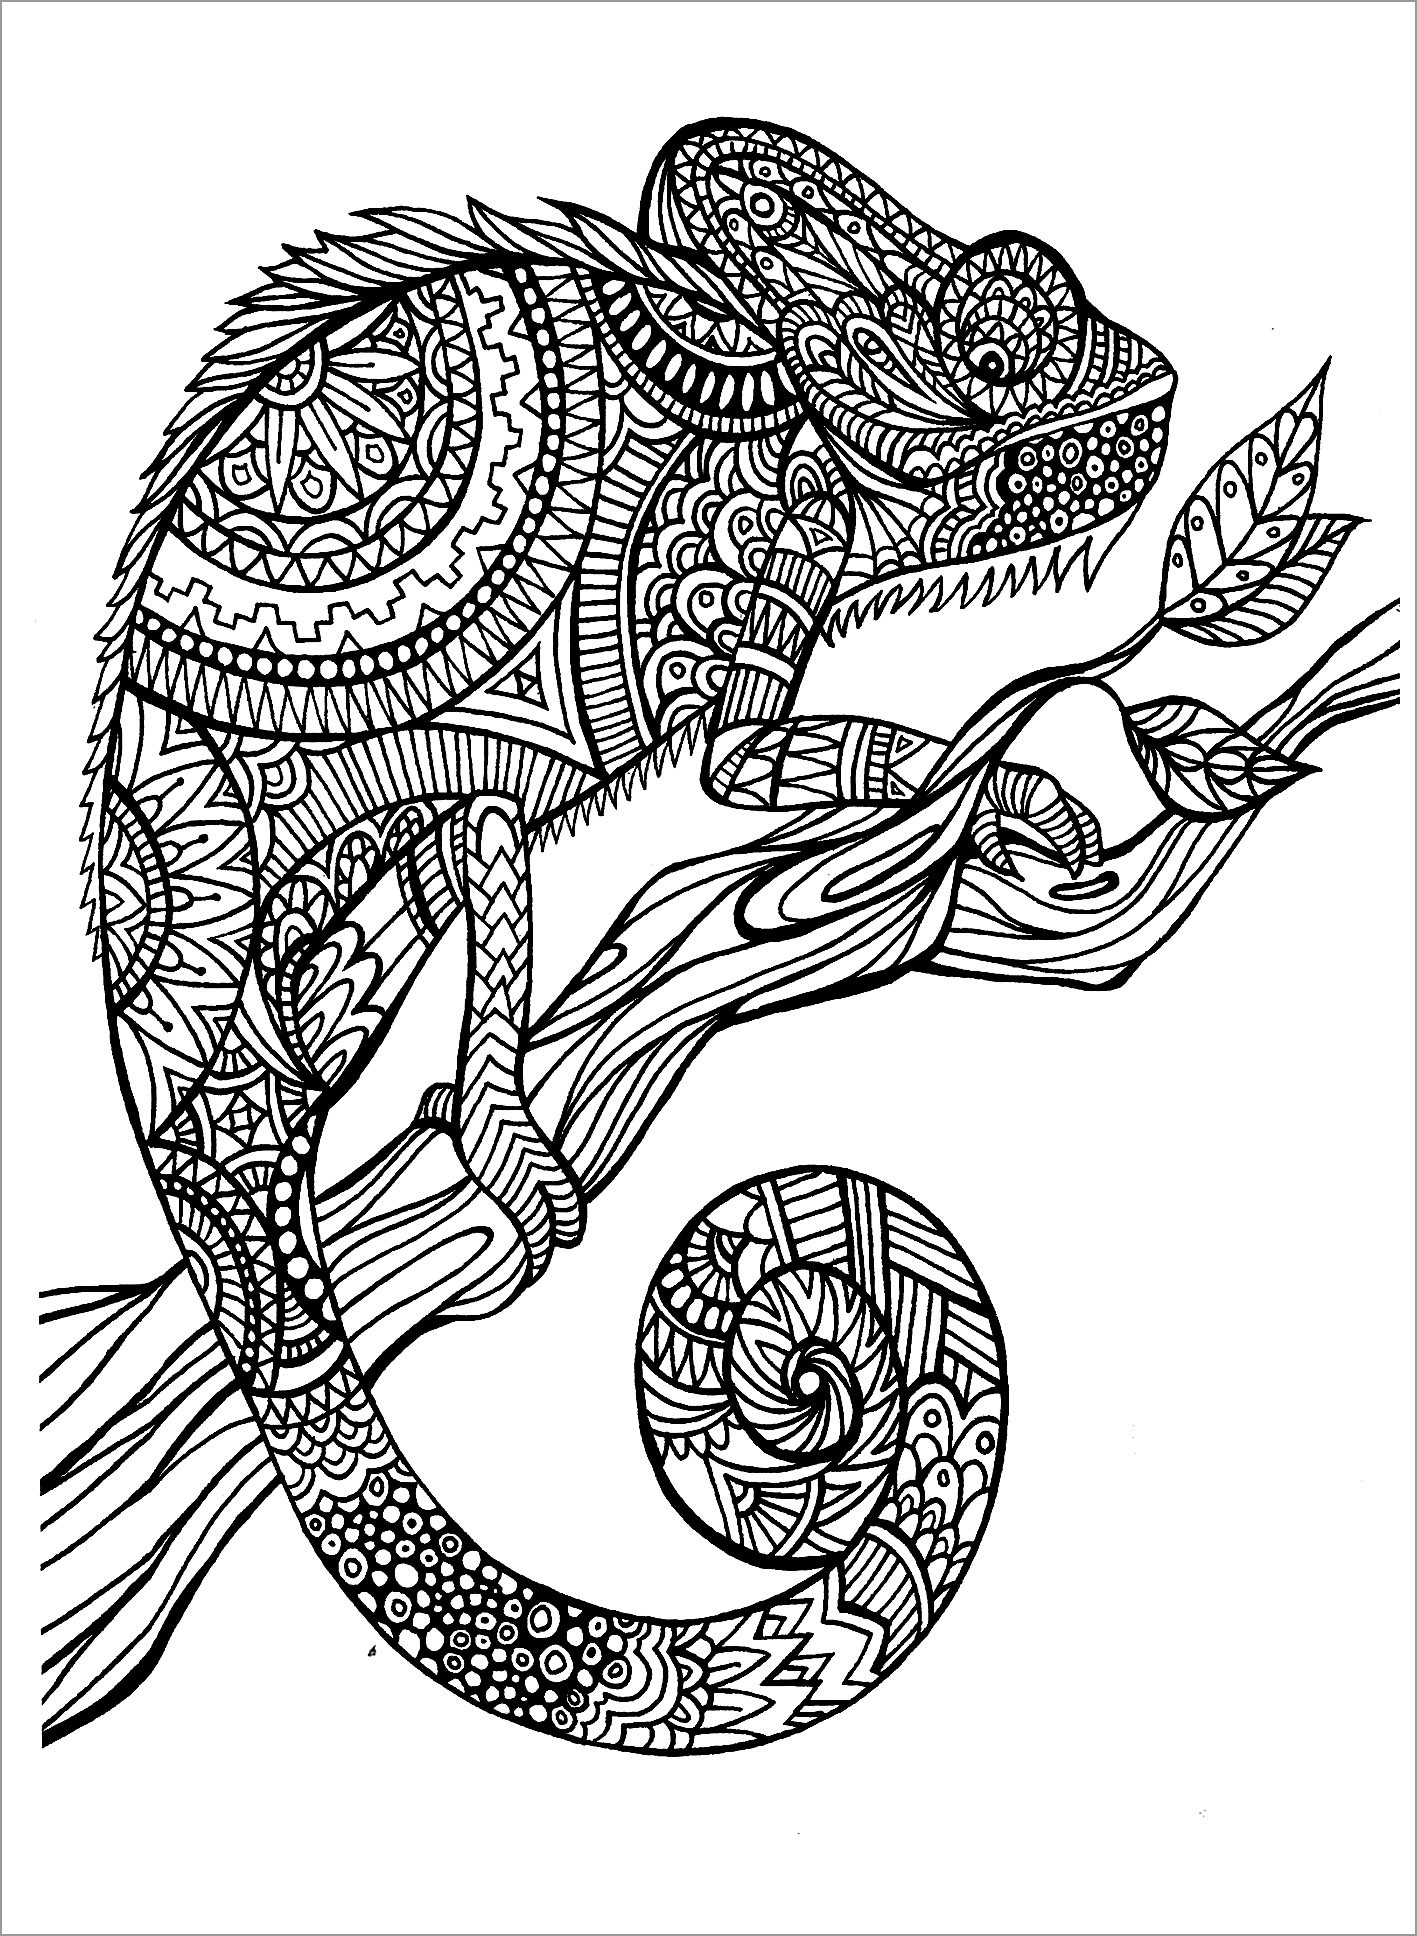 Lizards Coloring Pages - ColoringBay